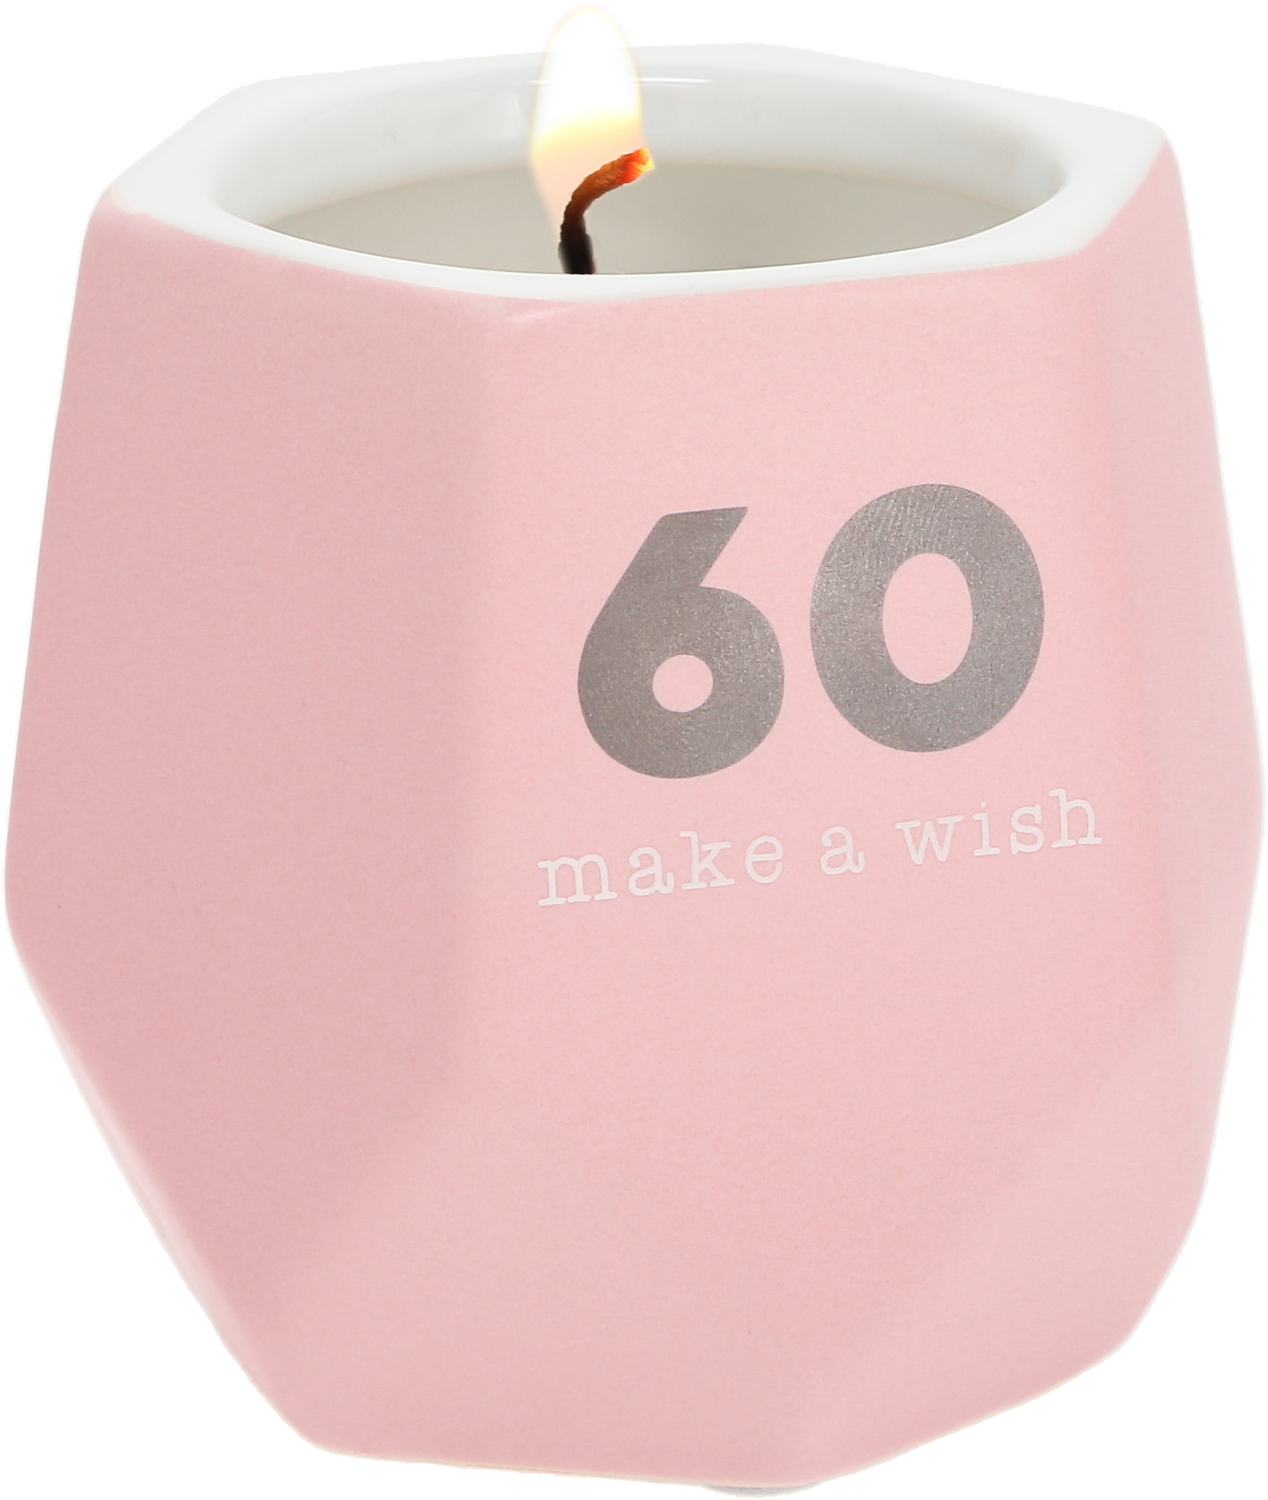 60 by Happy Confetti to You - 60 - 8 oz - 100% Soy Wax Candle
Scent: Tranquility